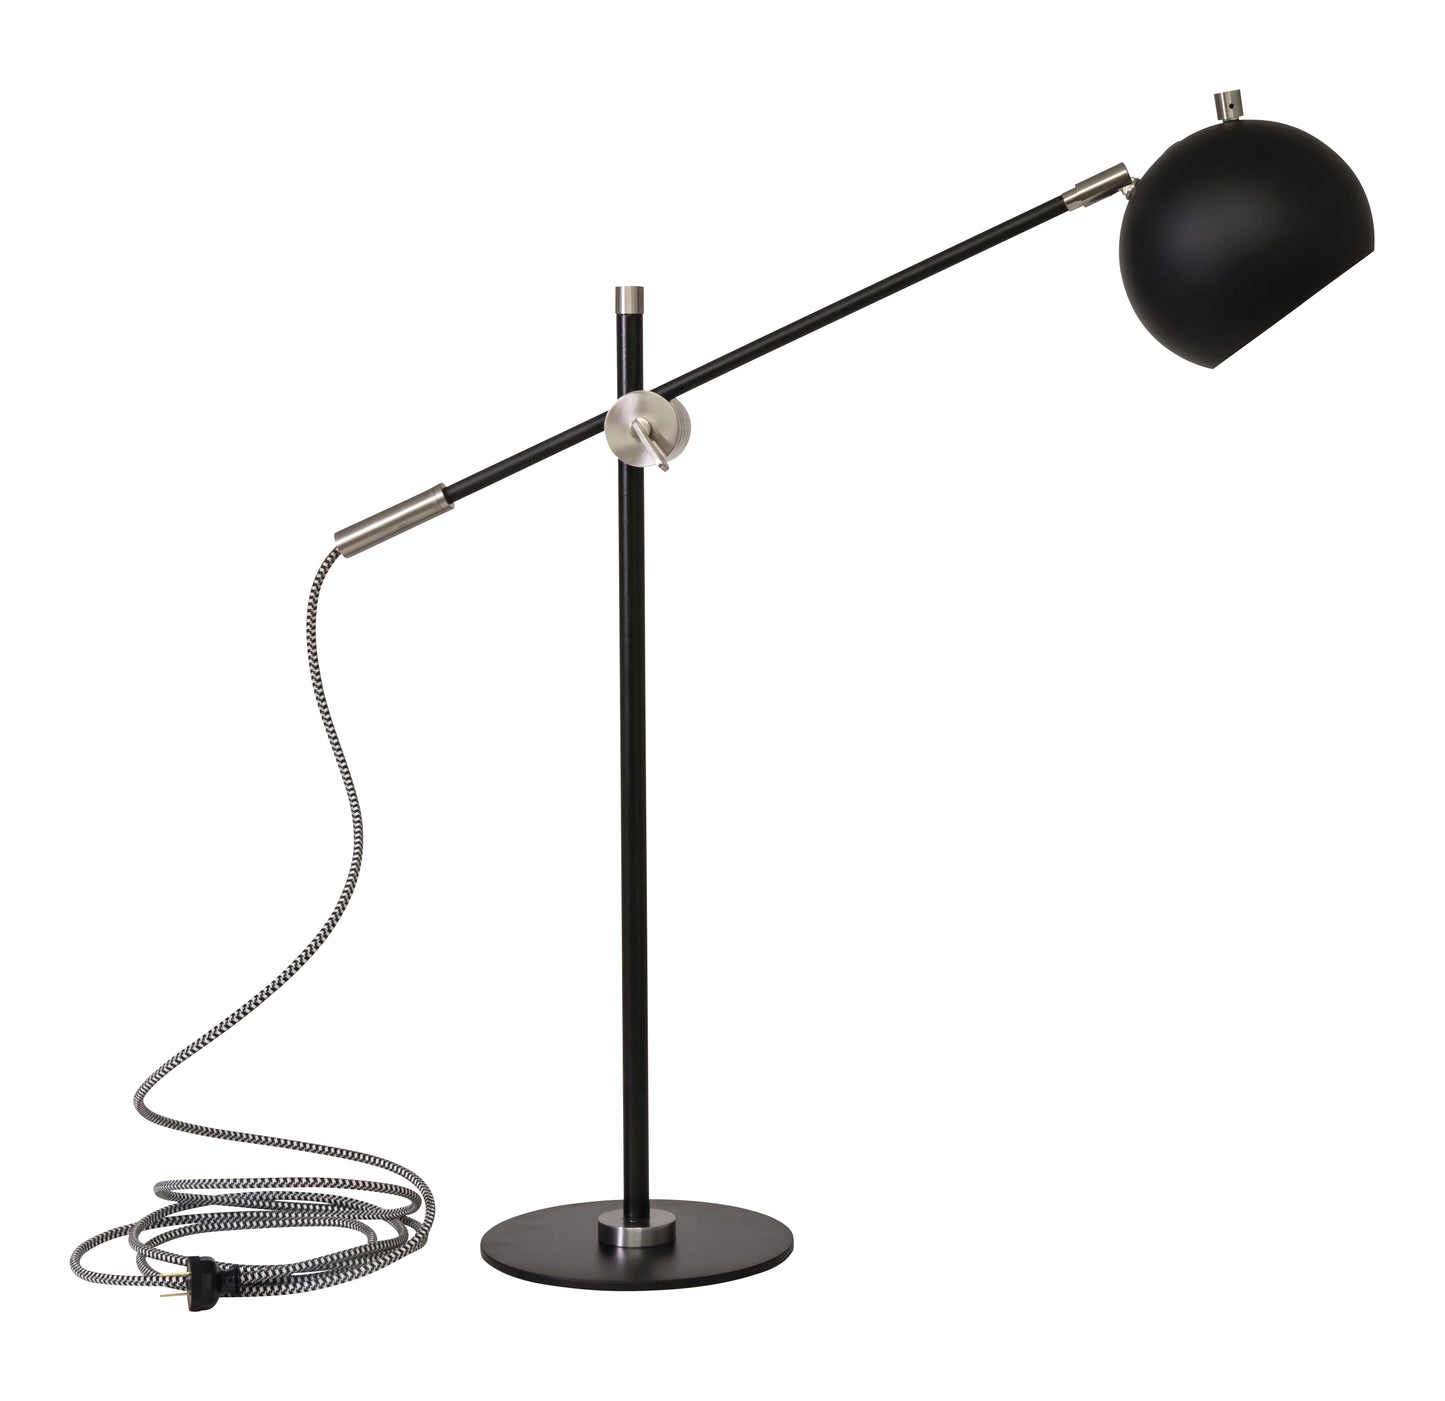 House of Troy Orwell LED Counterbalance Table Lamp in Black with Satin Nickel Accents OR750-BLKSN